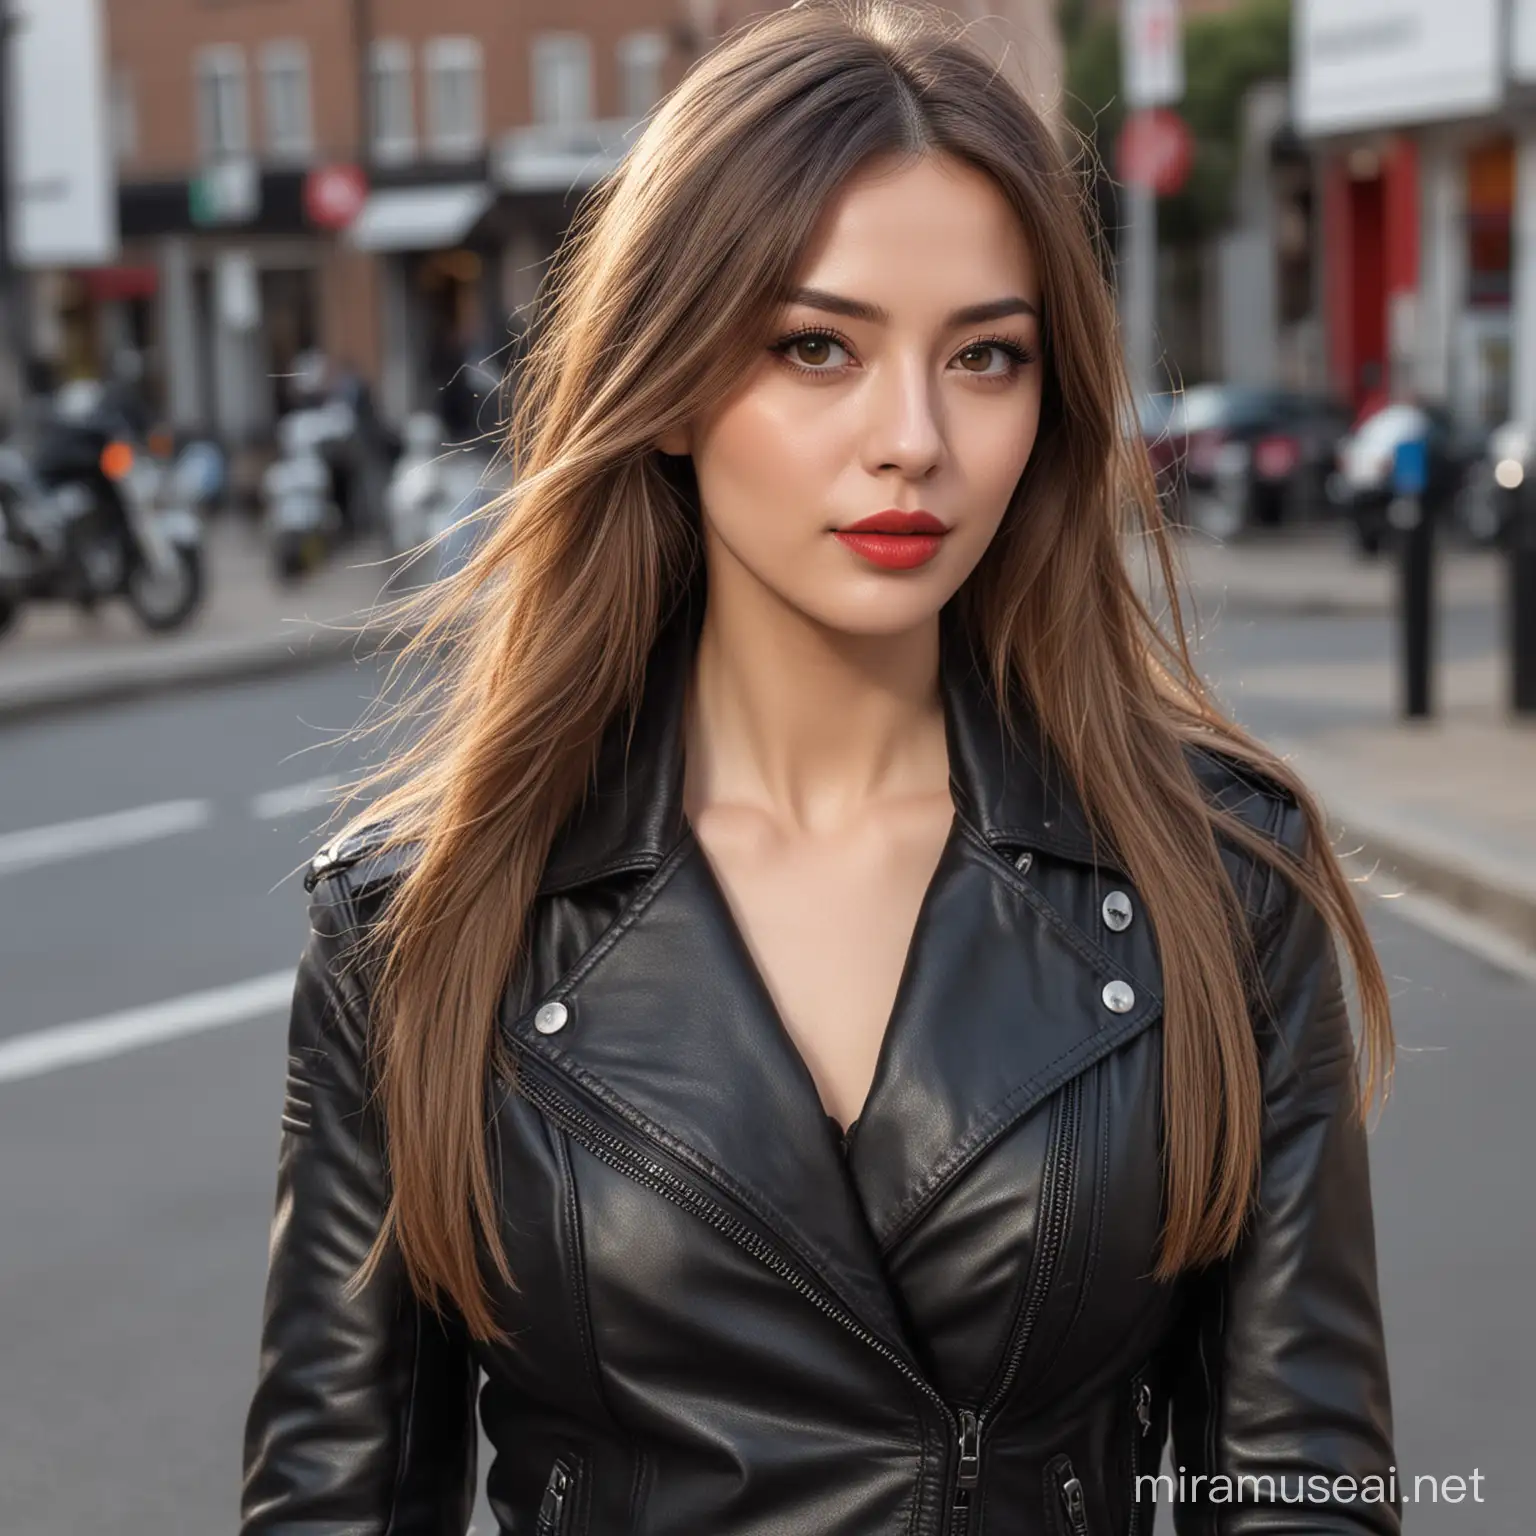 solo person，solo，elongated face，Tall nose，largeeyes，double eyelid，Light-colored eyeshadow，Redlip，Long hair shawl，mature pretty woman，Slim figure，Black leather jacket and skinny leather pants，Leather glove，Leather boots，Stand up，outside，the street，the motorcycle，Look to the lens，hyper qualit，4K，Photo level，True skin texture，